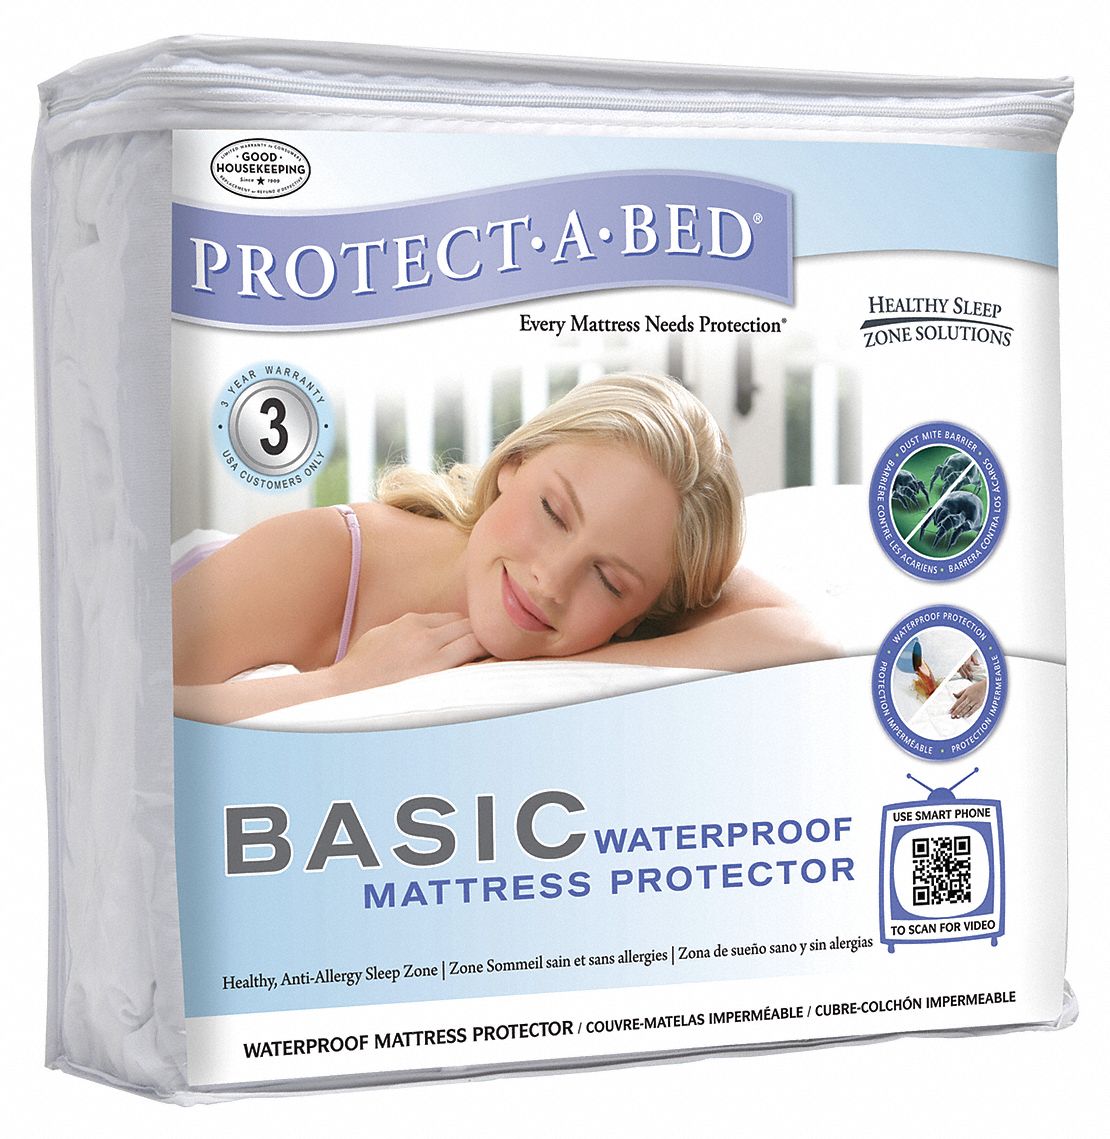 Mattress Pad Protector: Full XL, 14 in Pocket Size, 80 in Lg, 54 in Wd